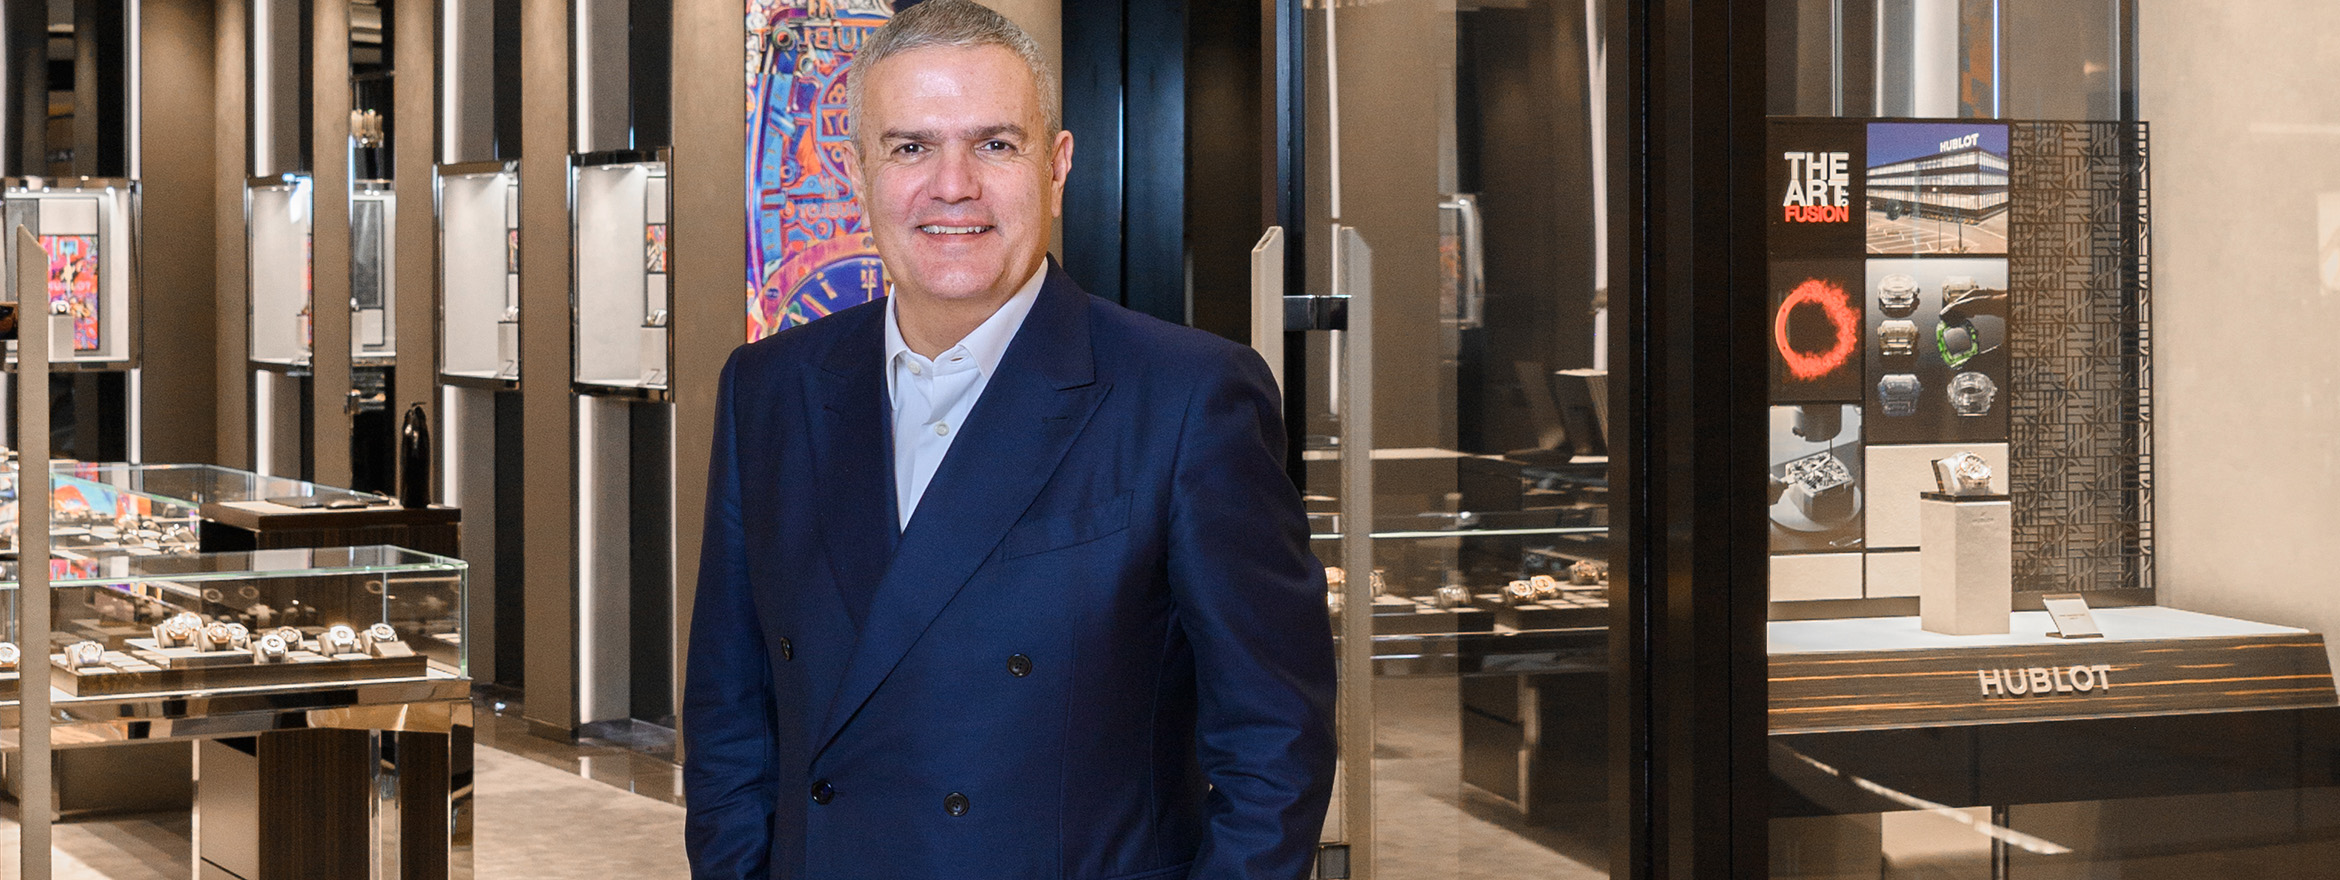 15 Minutes with Ricardo Guadalupe, Hublot CEO